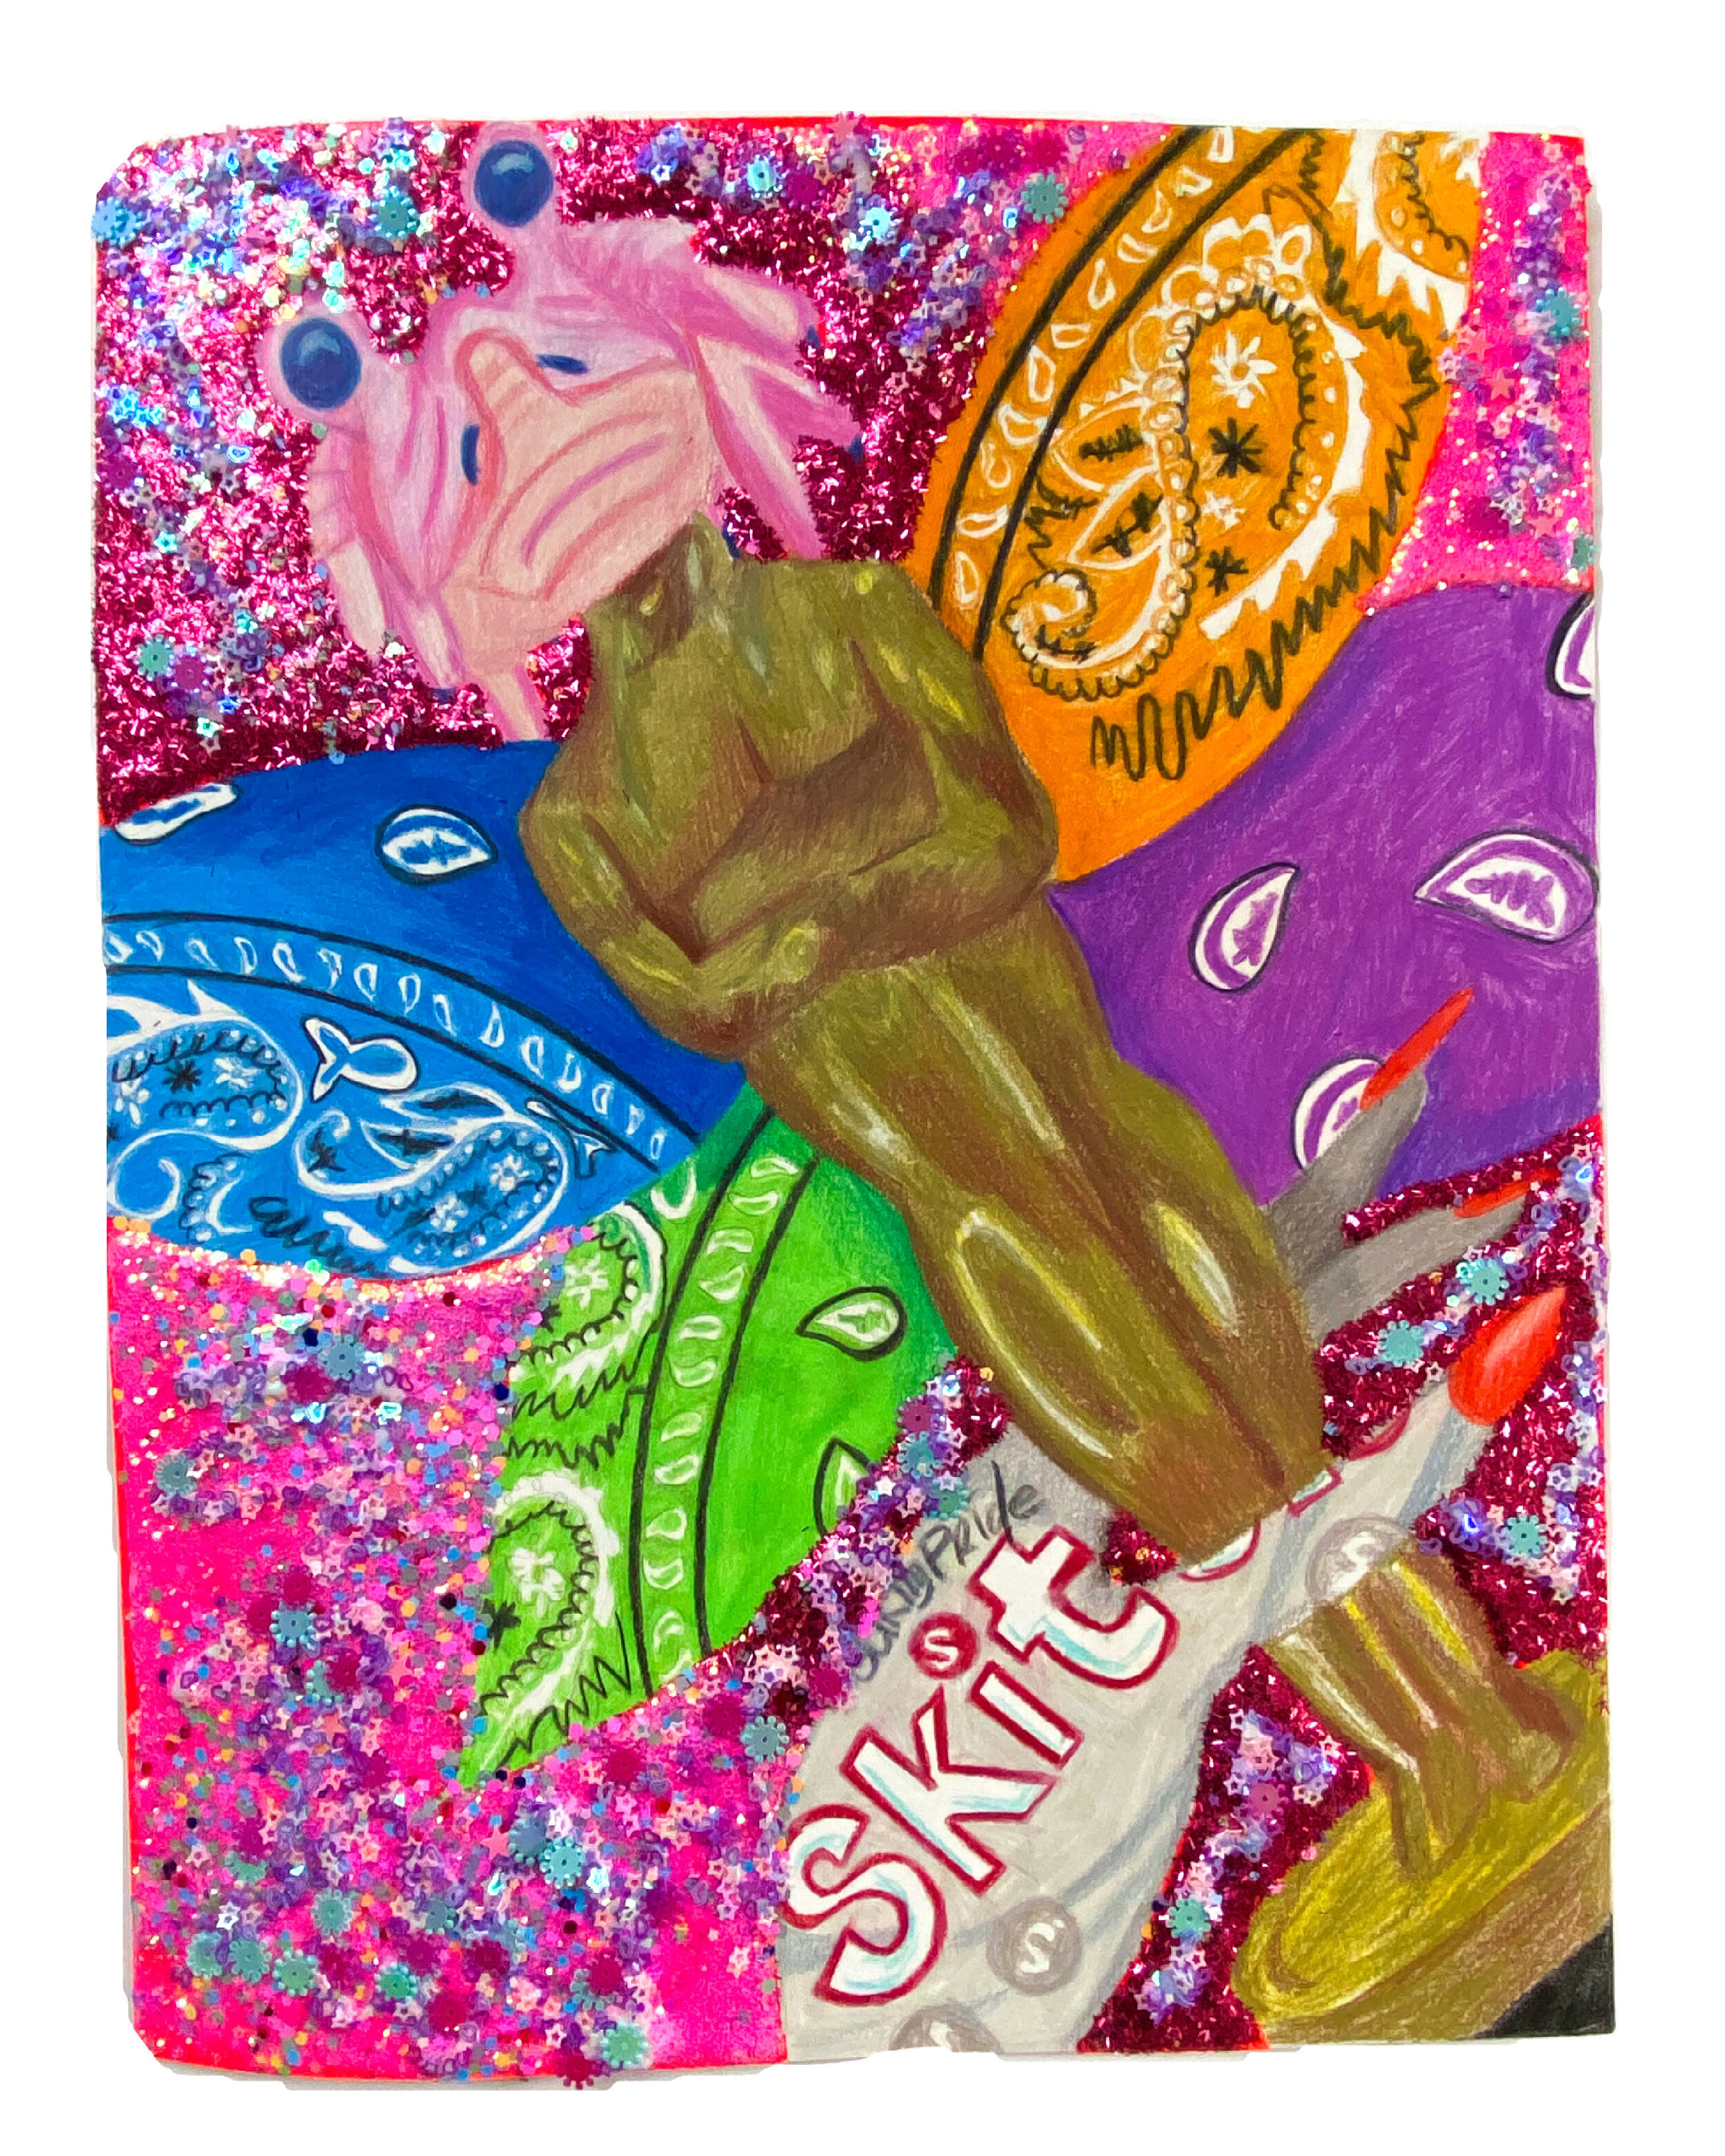   Oscar with Pink Funko Pop Jar Jar Binks Head with Bandana Fairy Wings Held by a Hand Painted like a Bag of Gray and Gay Skittles , 2021  14 x 11 inches (38.1 x 27.94 cm.)  Colored pencil, acrylic paint, Elmer's glue, Modge Podge, and glitter on pap